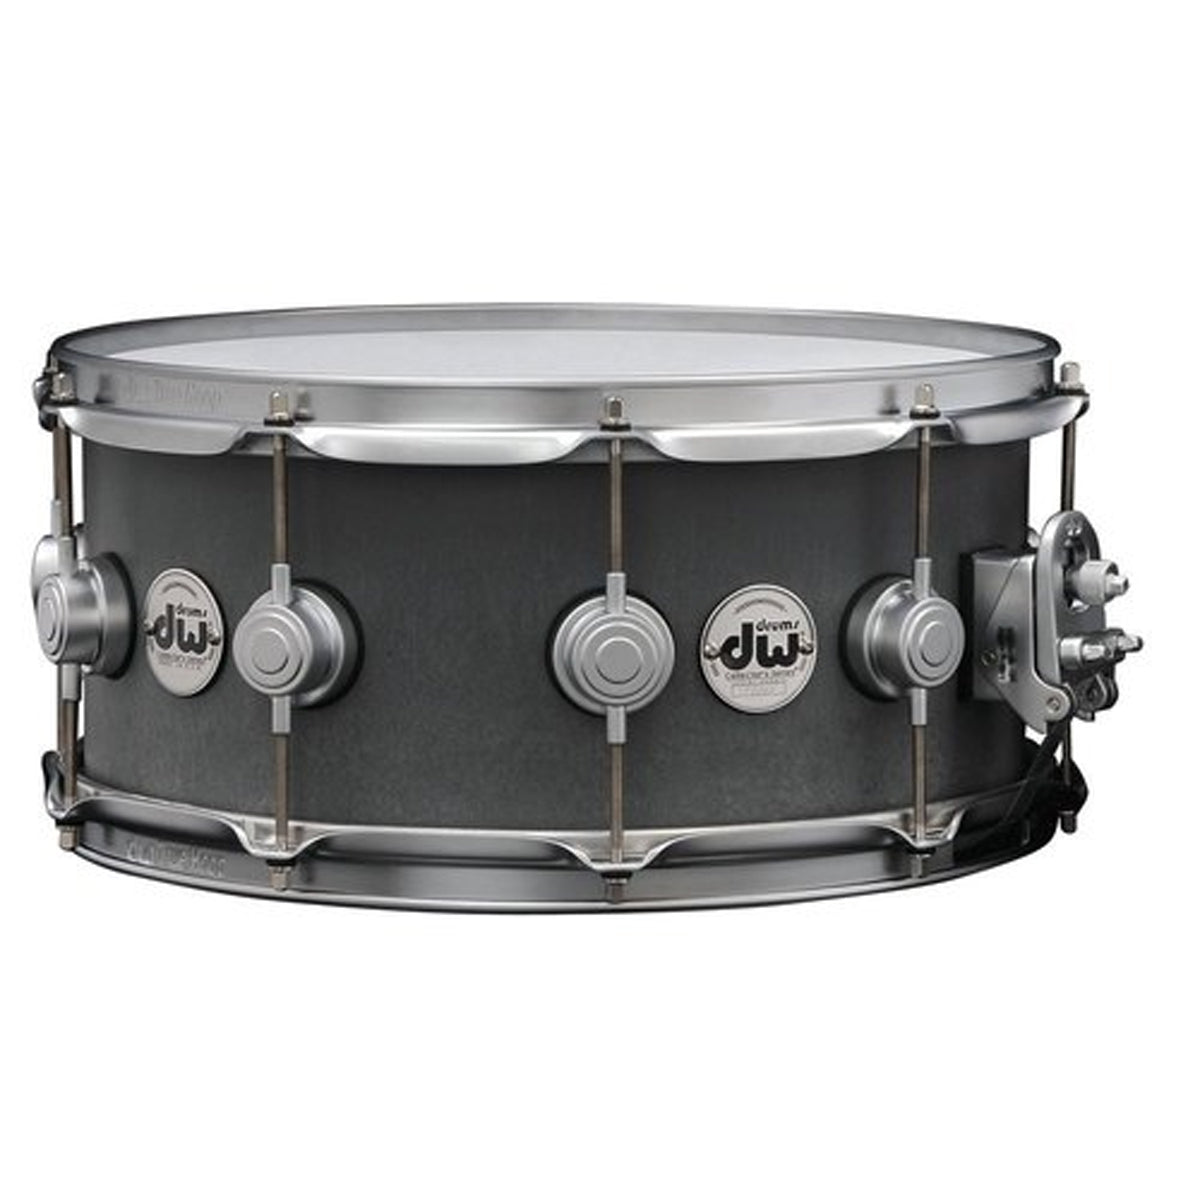 DW Collector's Series 14"x6.5" Concrete Snare